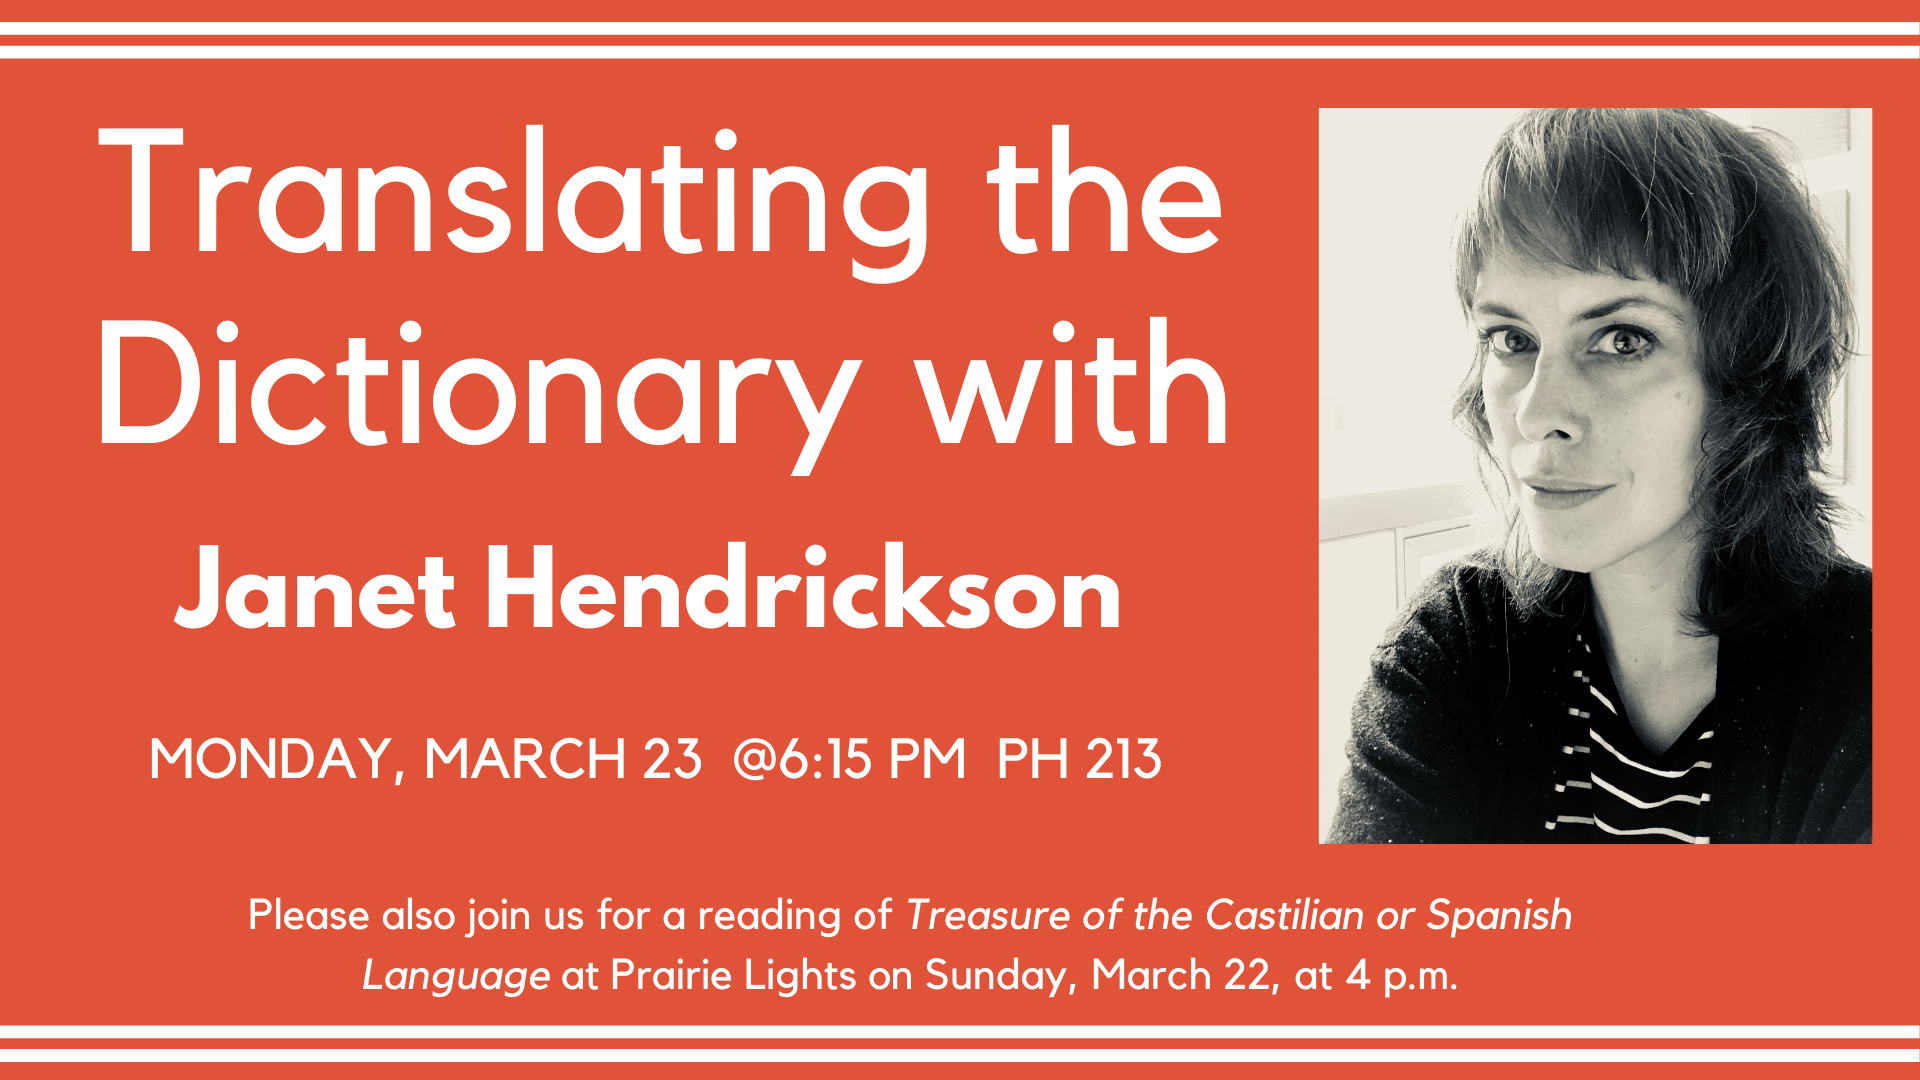 Translating the dictionary with Janet Hendrickson Monday March 23 @6:15 in 213 PH Please join us at Prarire Lights for a reading Sunday 22 at 4 pm